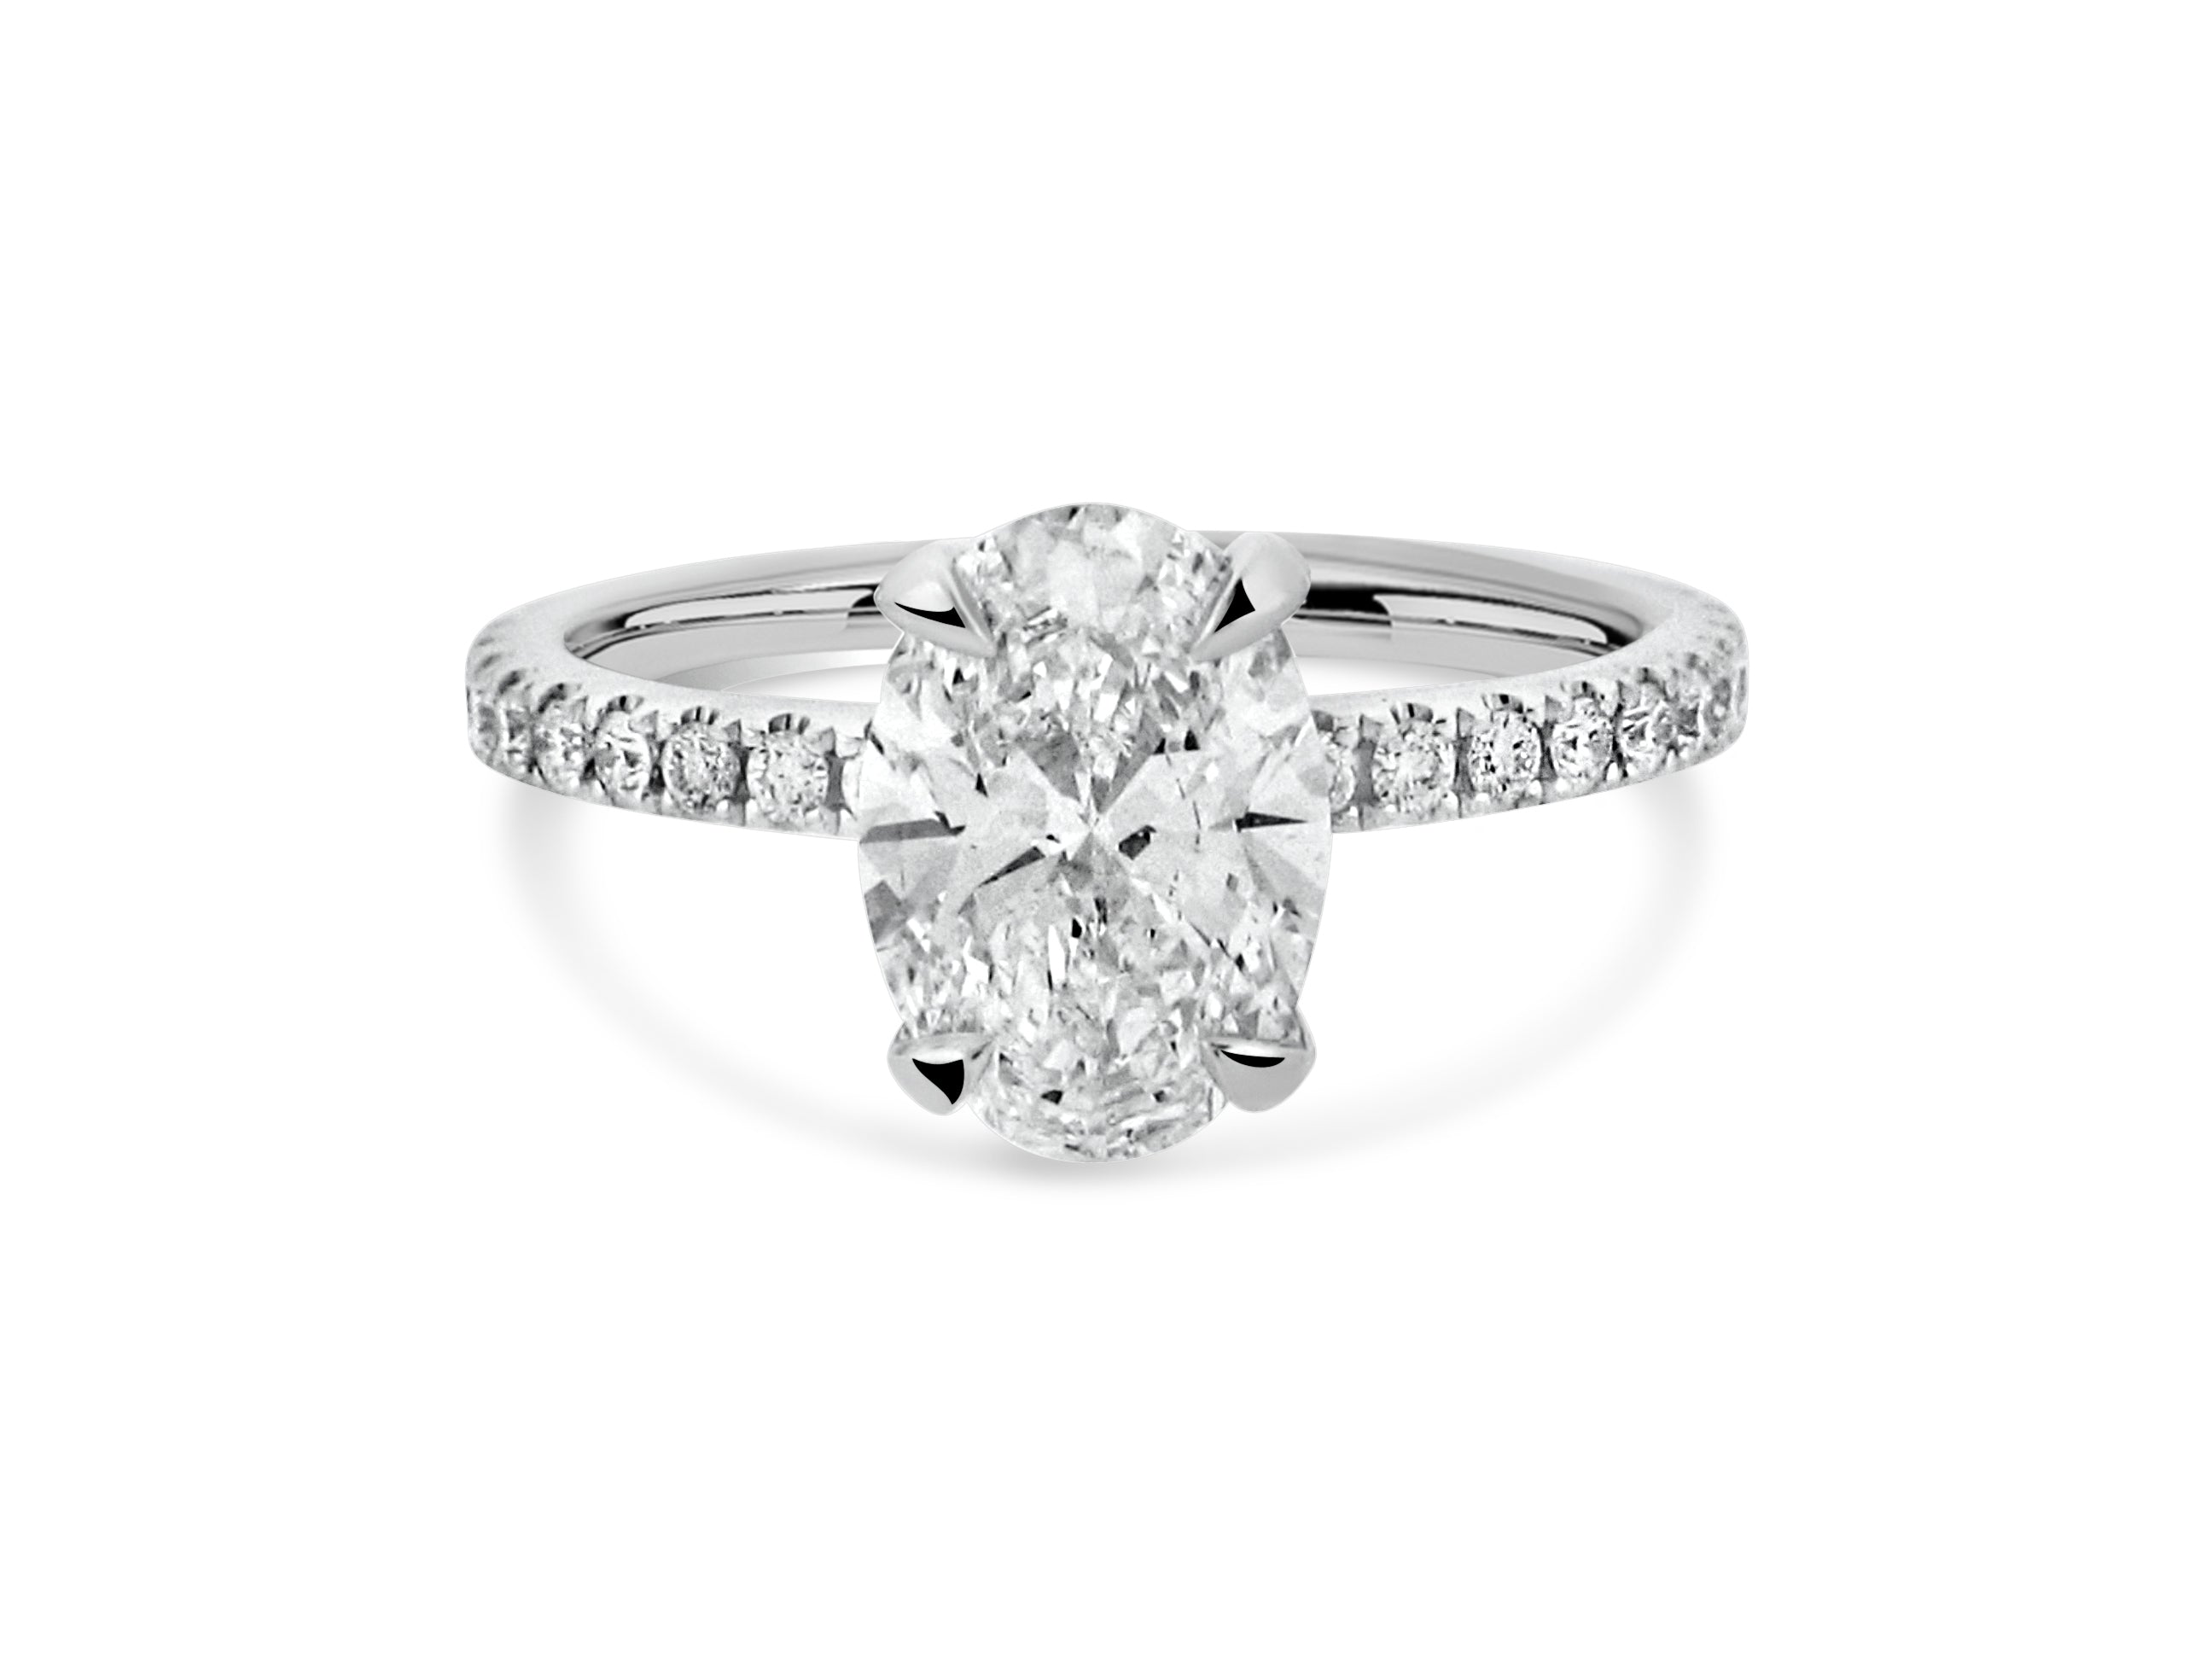 PRIVE' 18K WHITE GOLD 1.94CT SI1 CLARITY AND F COLOR OVAL LAB GROWN SWAROVSKI DIAMOND WITH EXCELLENT CUT AND CERTIFIED.  SURROUNDED BY .43CT SI1/G NATURAL ACCENT DIAMONDS